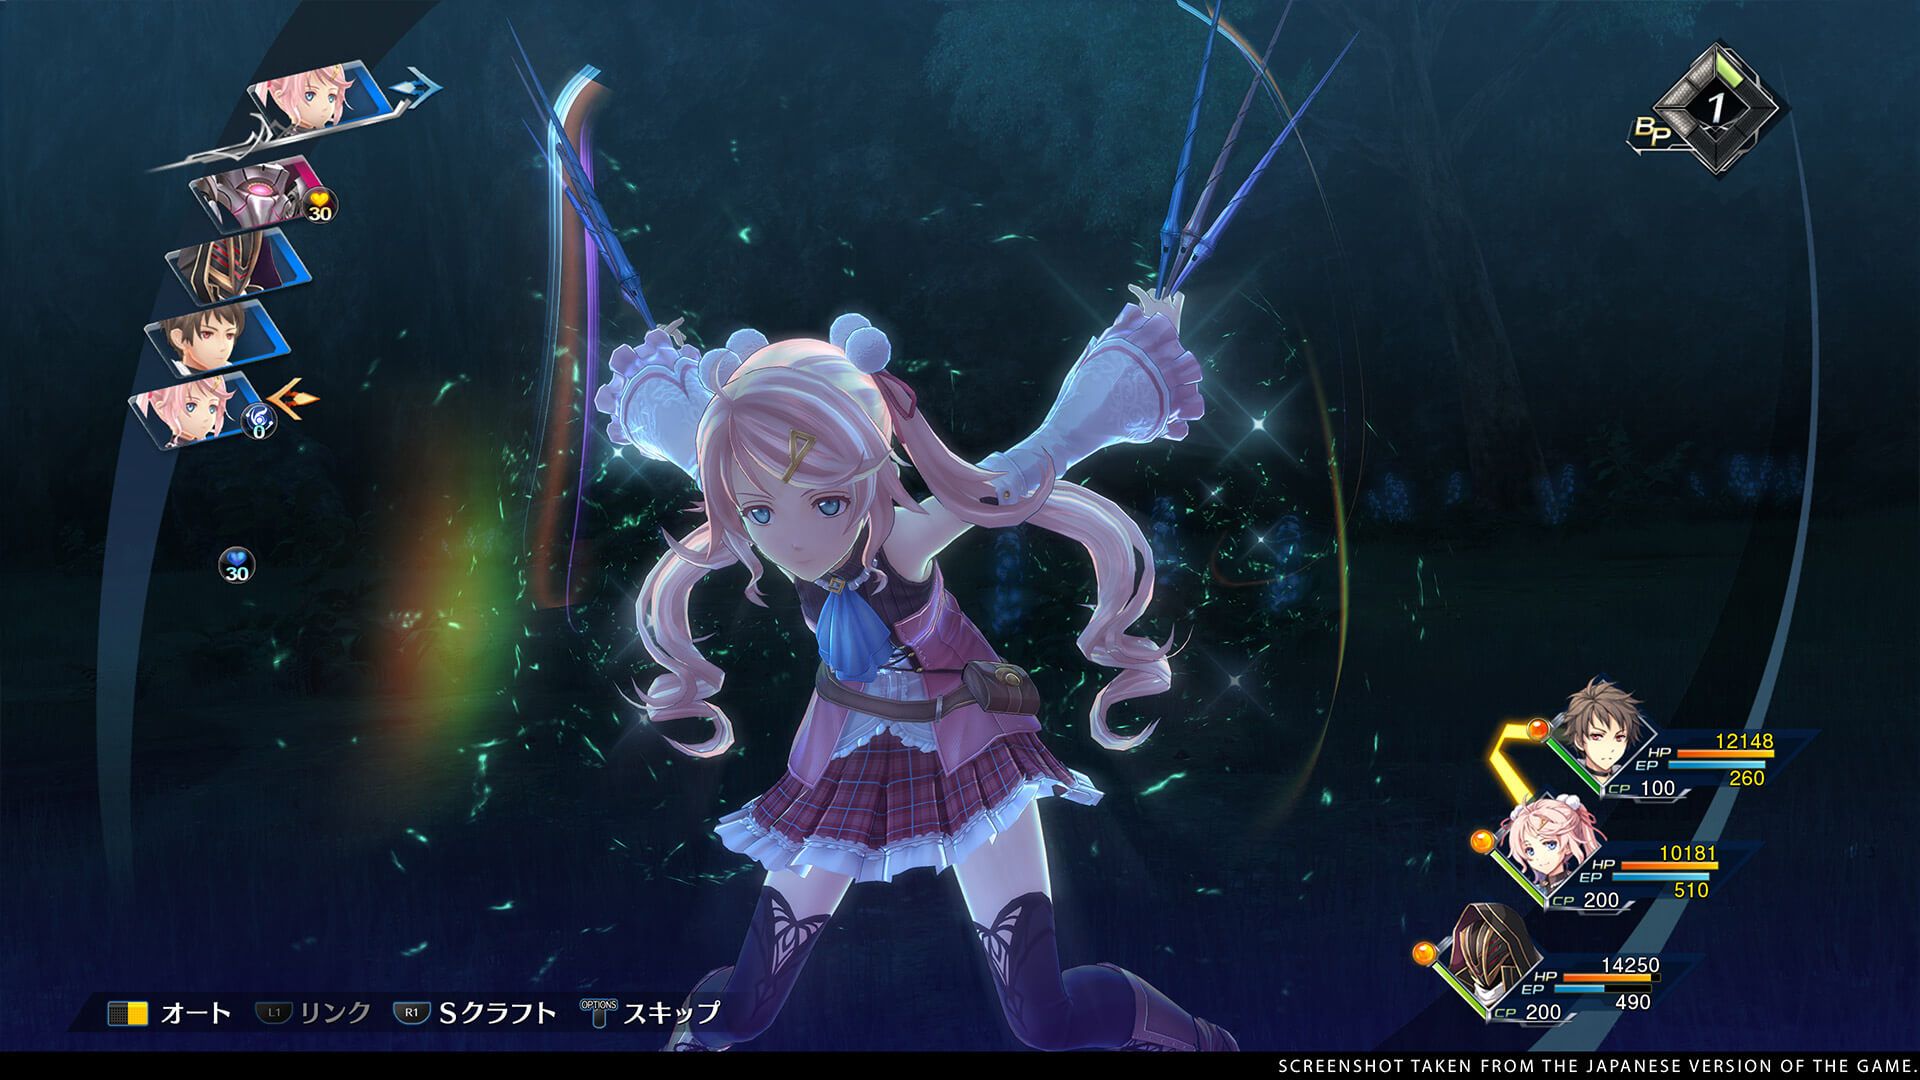 for windows download The Legend of Heroes: Trails into Reverie